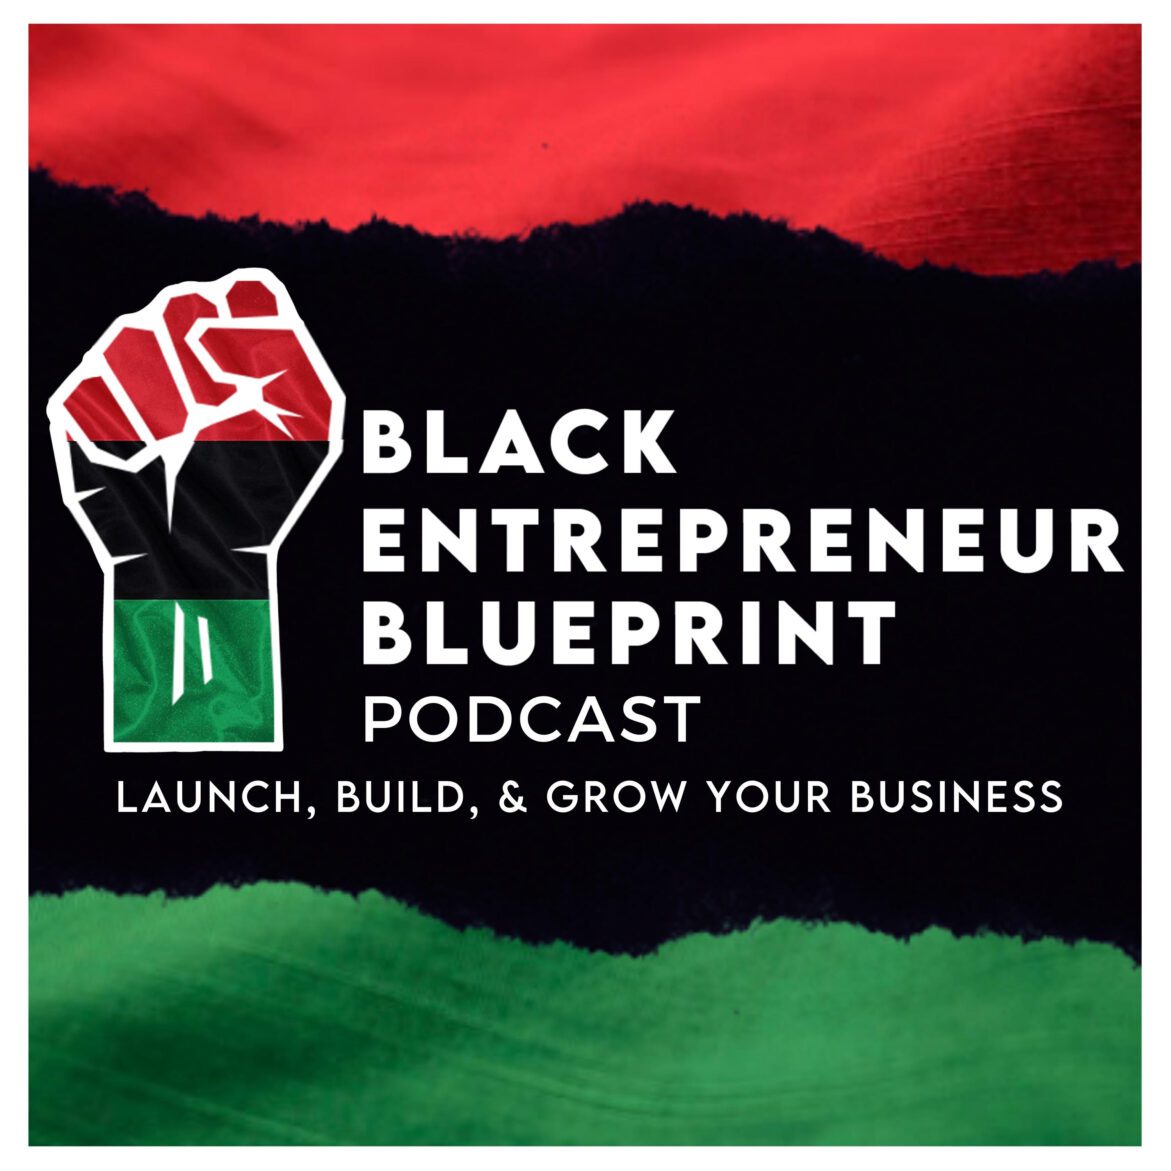 Black Podcasting - Black Entrepreneur Blueprint 452 - Jay Jones - How To Scale Your Business With Inbound Marketing